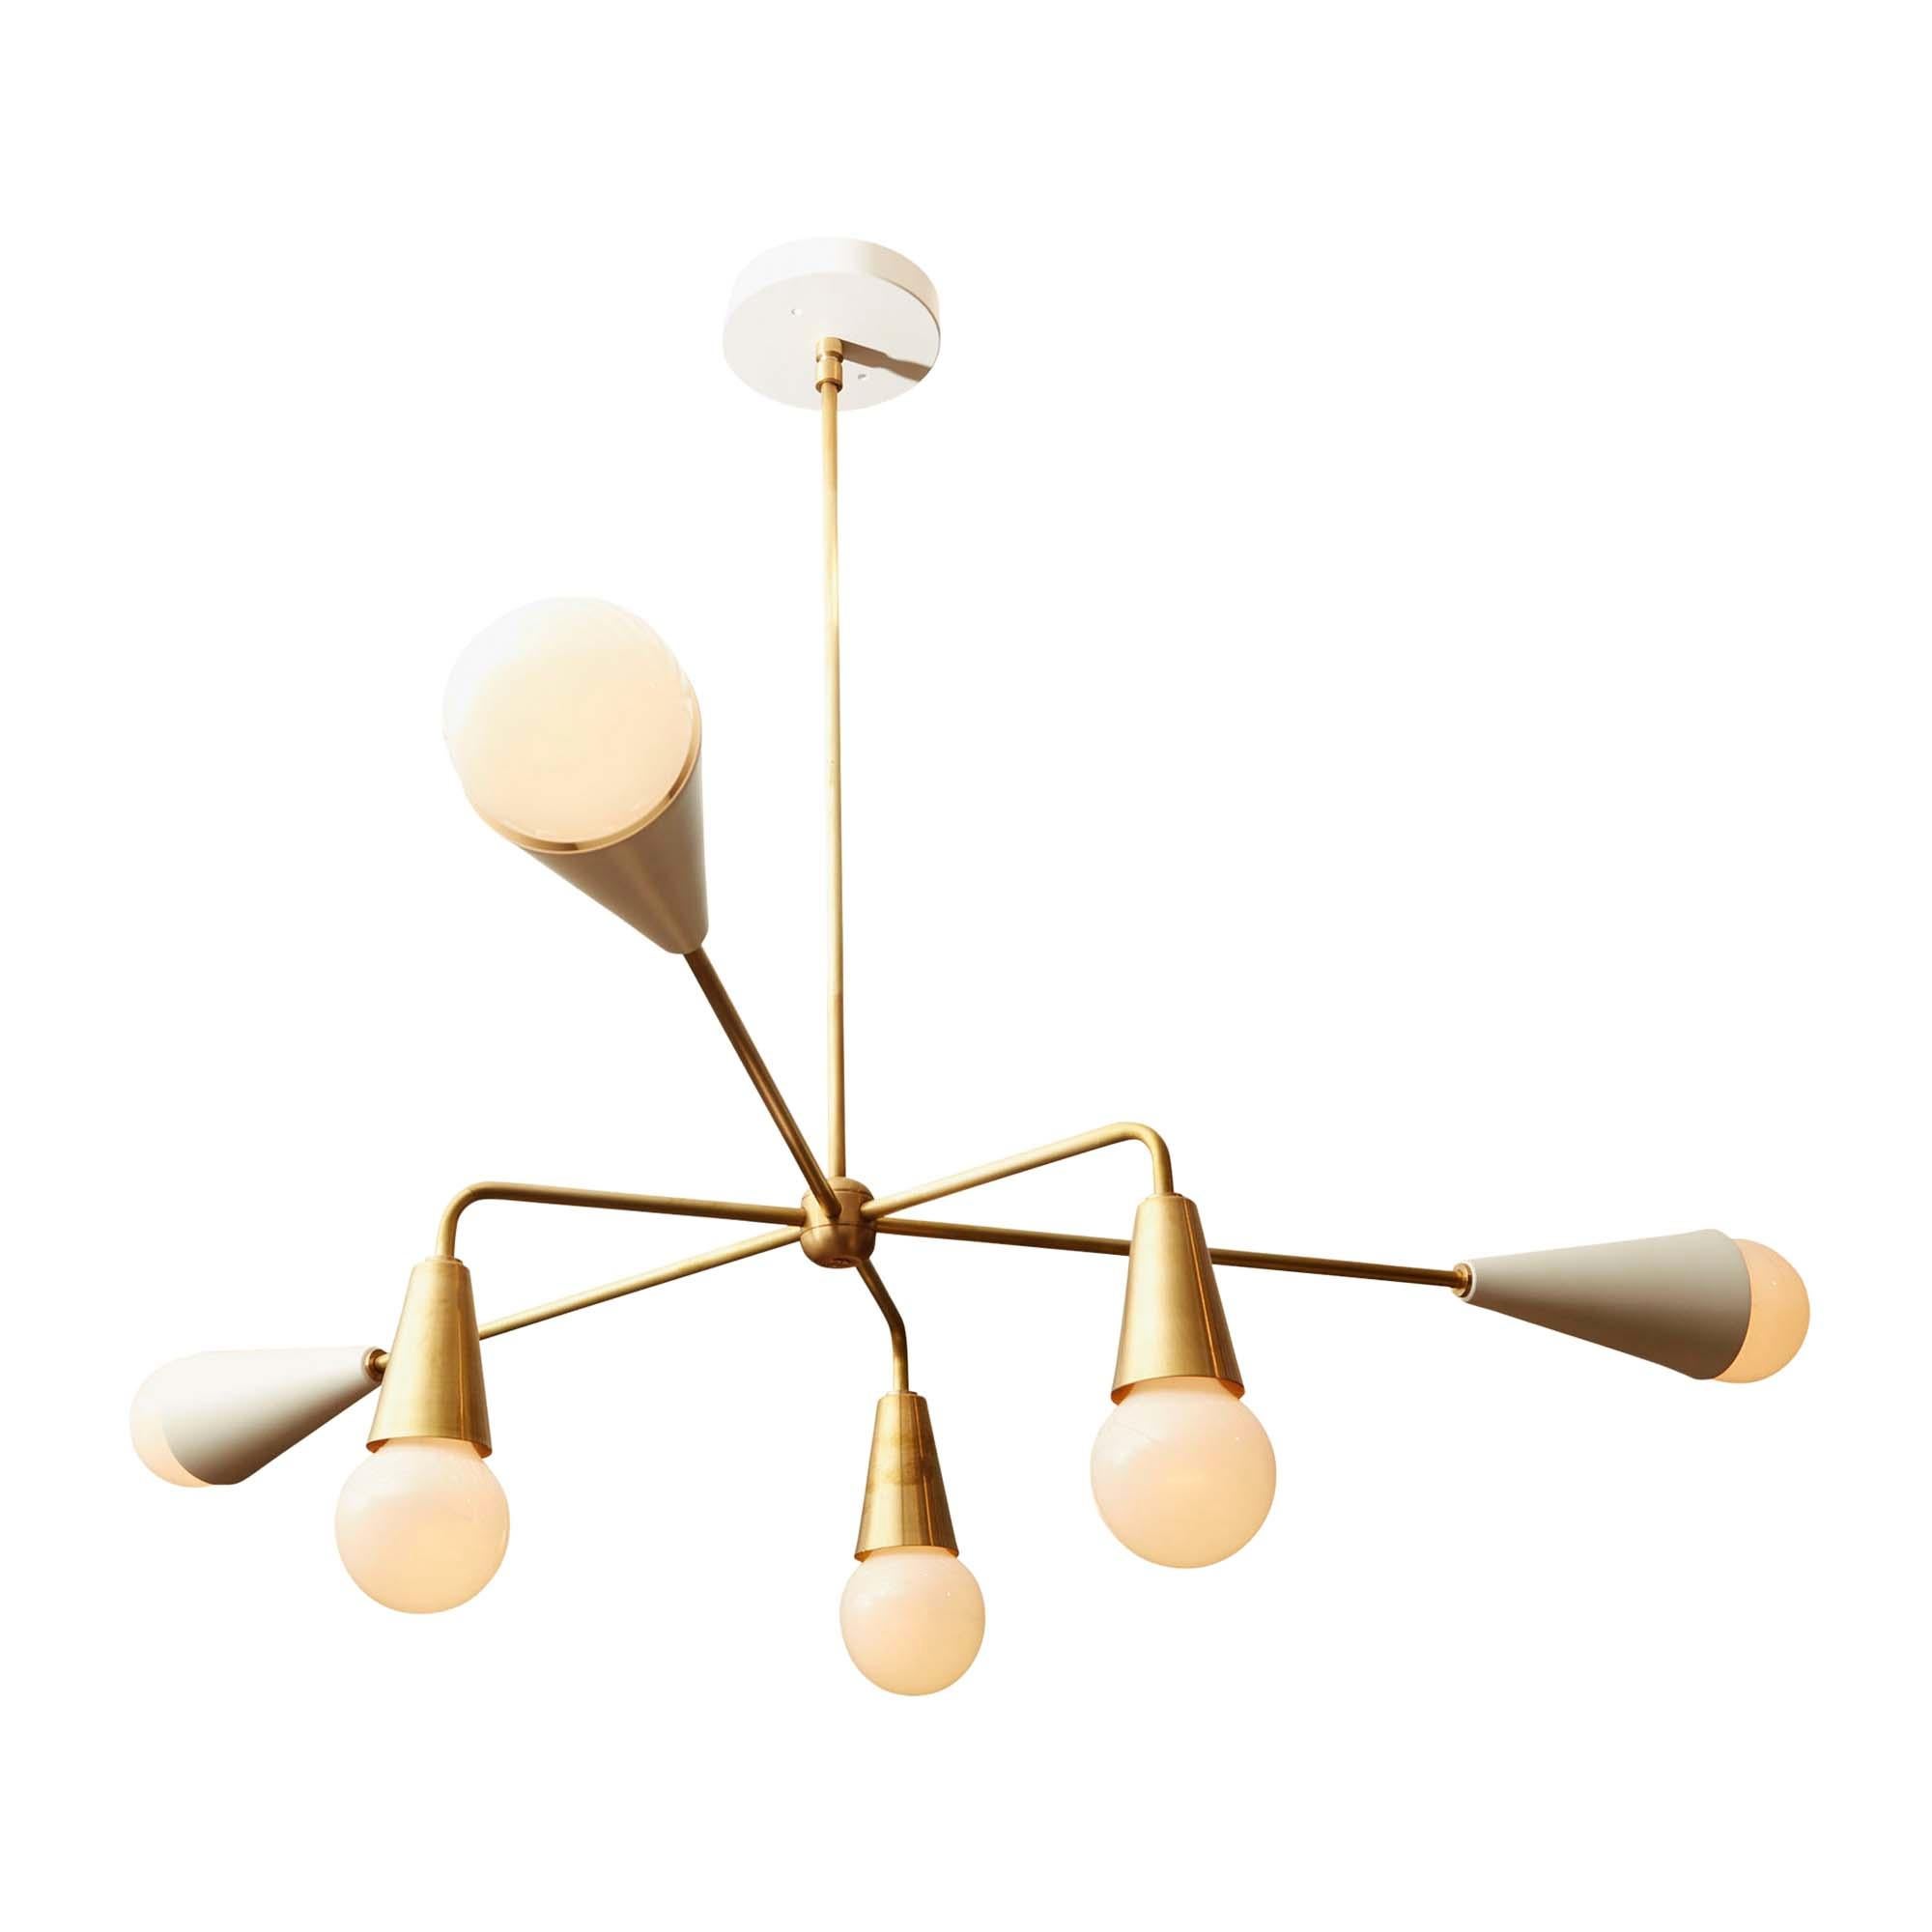 The XL 6-Globe chandelier features six arms that are centered on a brass rod. Three of the globes are angled down with brass shades. The other three have powdercoated shades.

The Lawson-Fenning Collection is designed and handmade in Los Angeles,